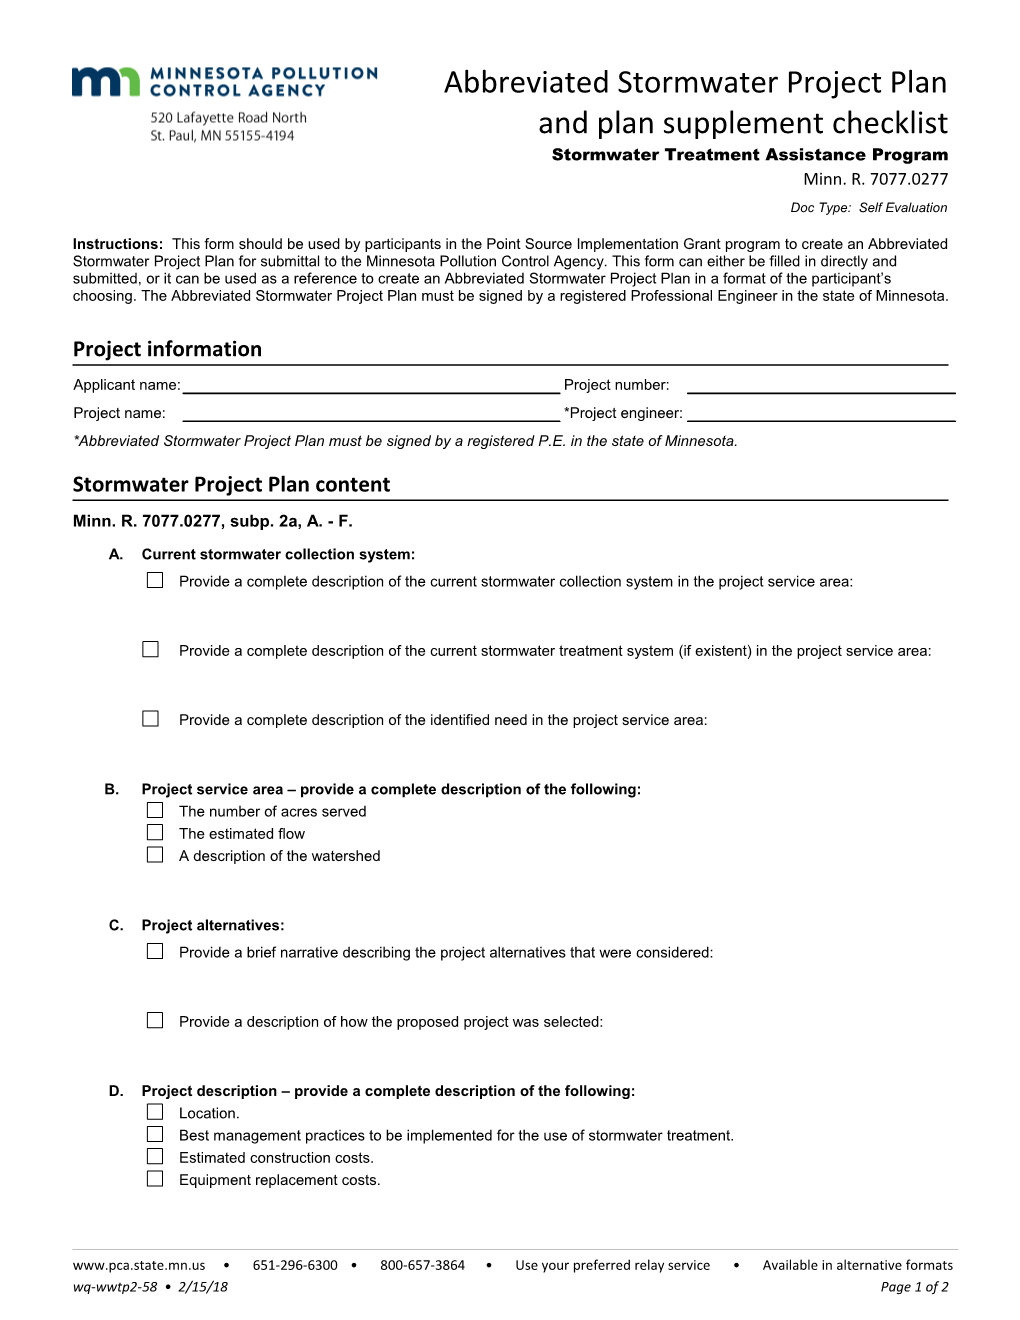 Abbreviated Stormwater Project Plan and Plan Supplement Checklist